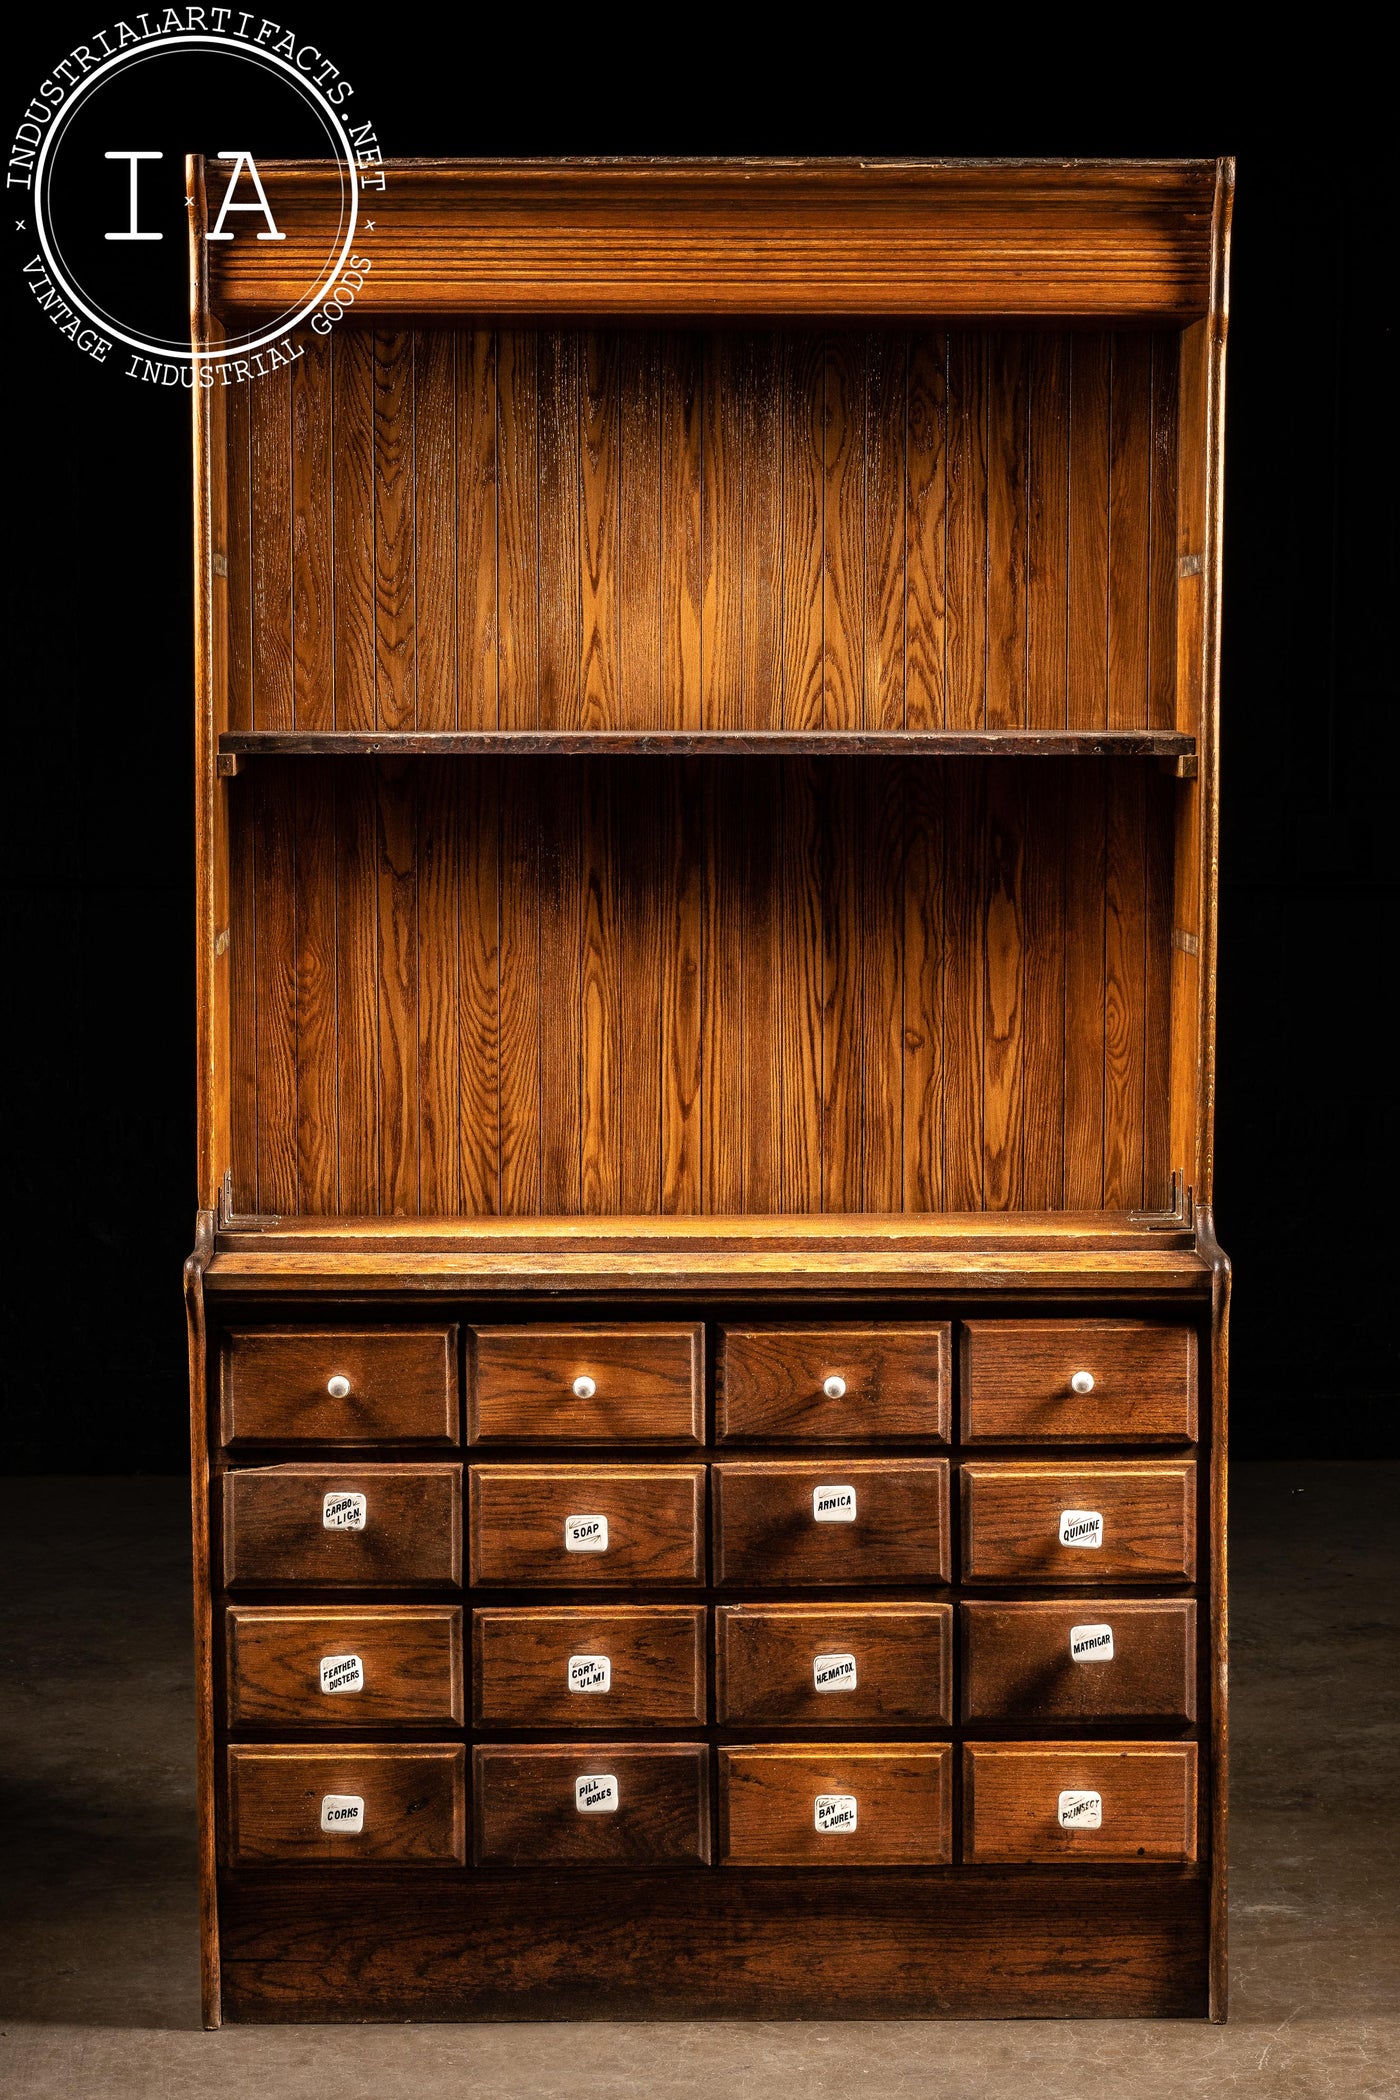 Early American Wooden Apothecary Hutch